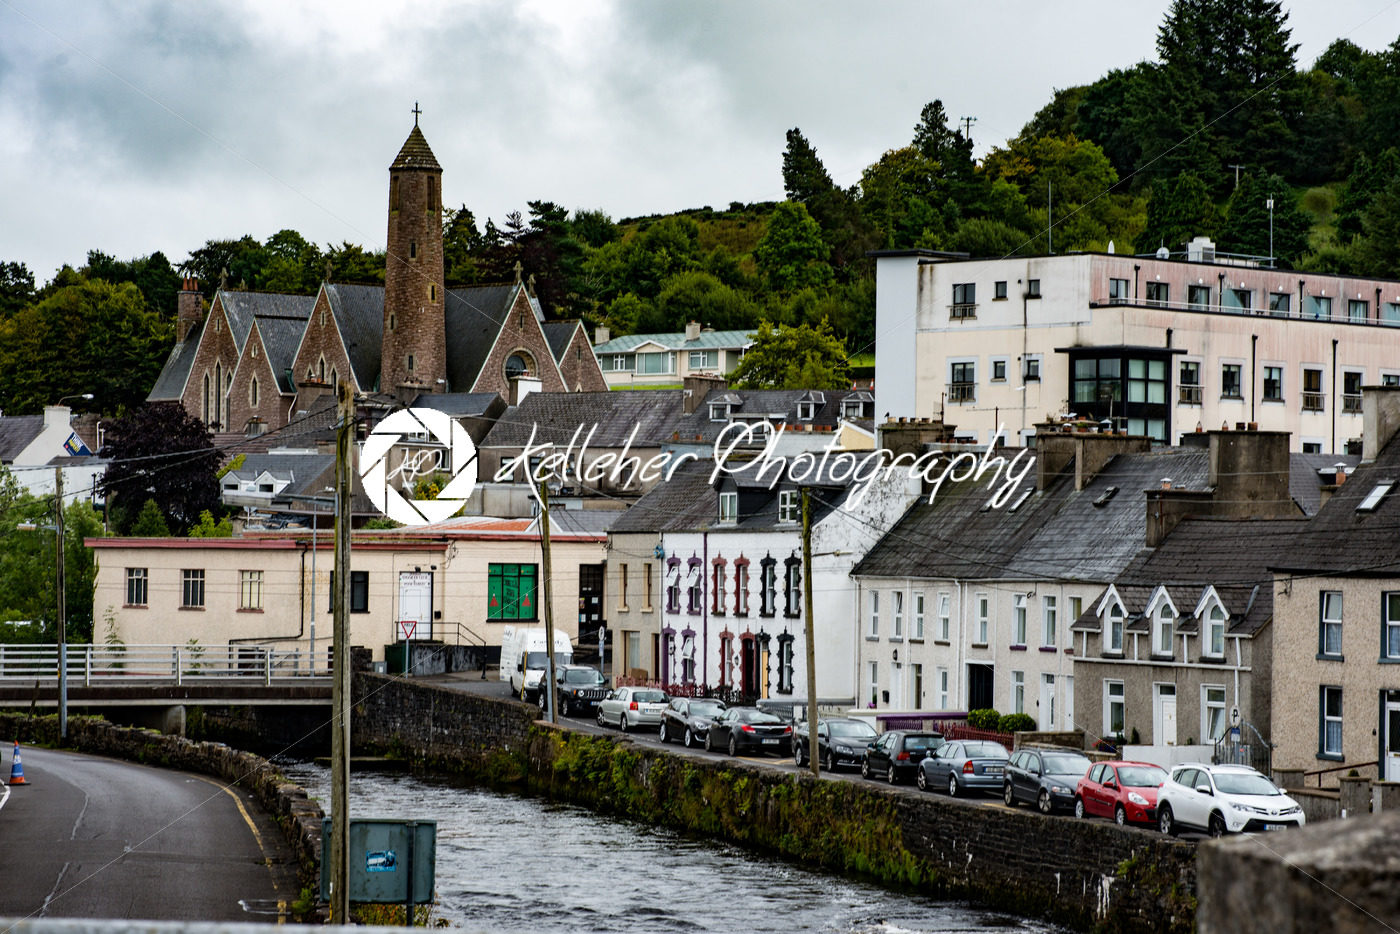 DONEGAL, IRELAND – AUGUST 25, 2017: Buildings in the city center of Donegal Ireland - Kelleher Photography Store